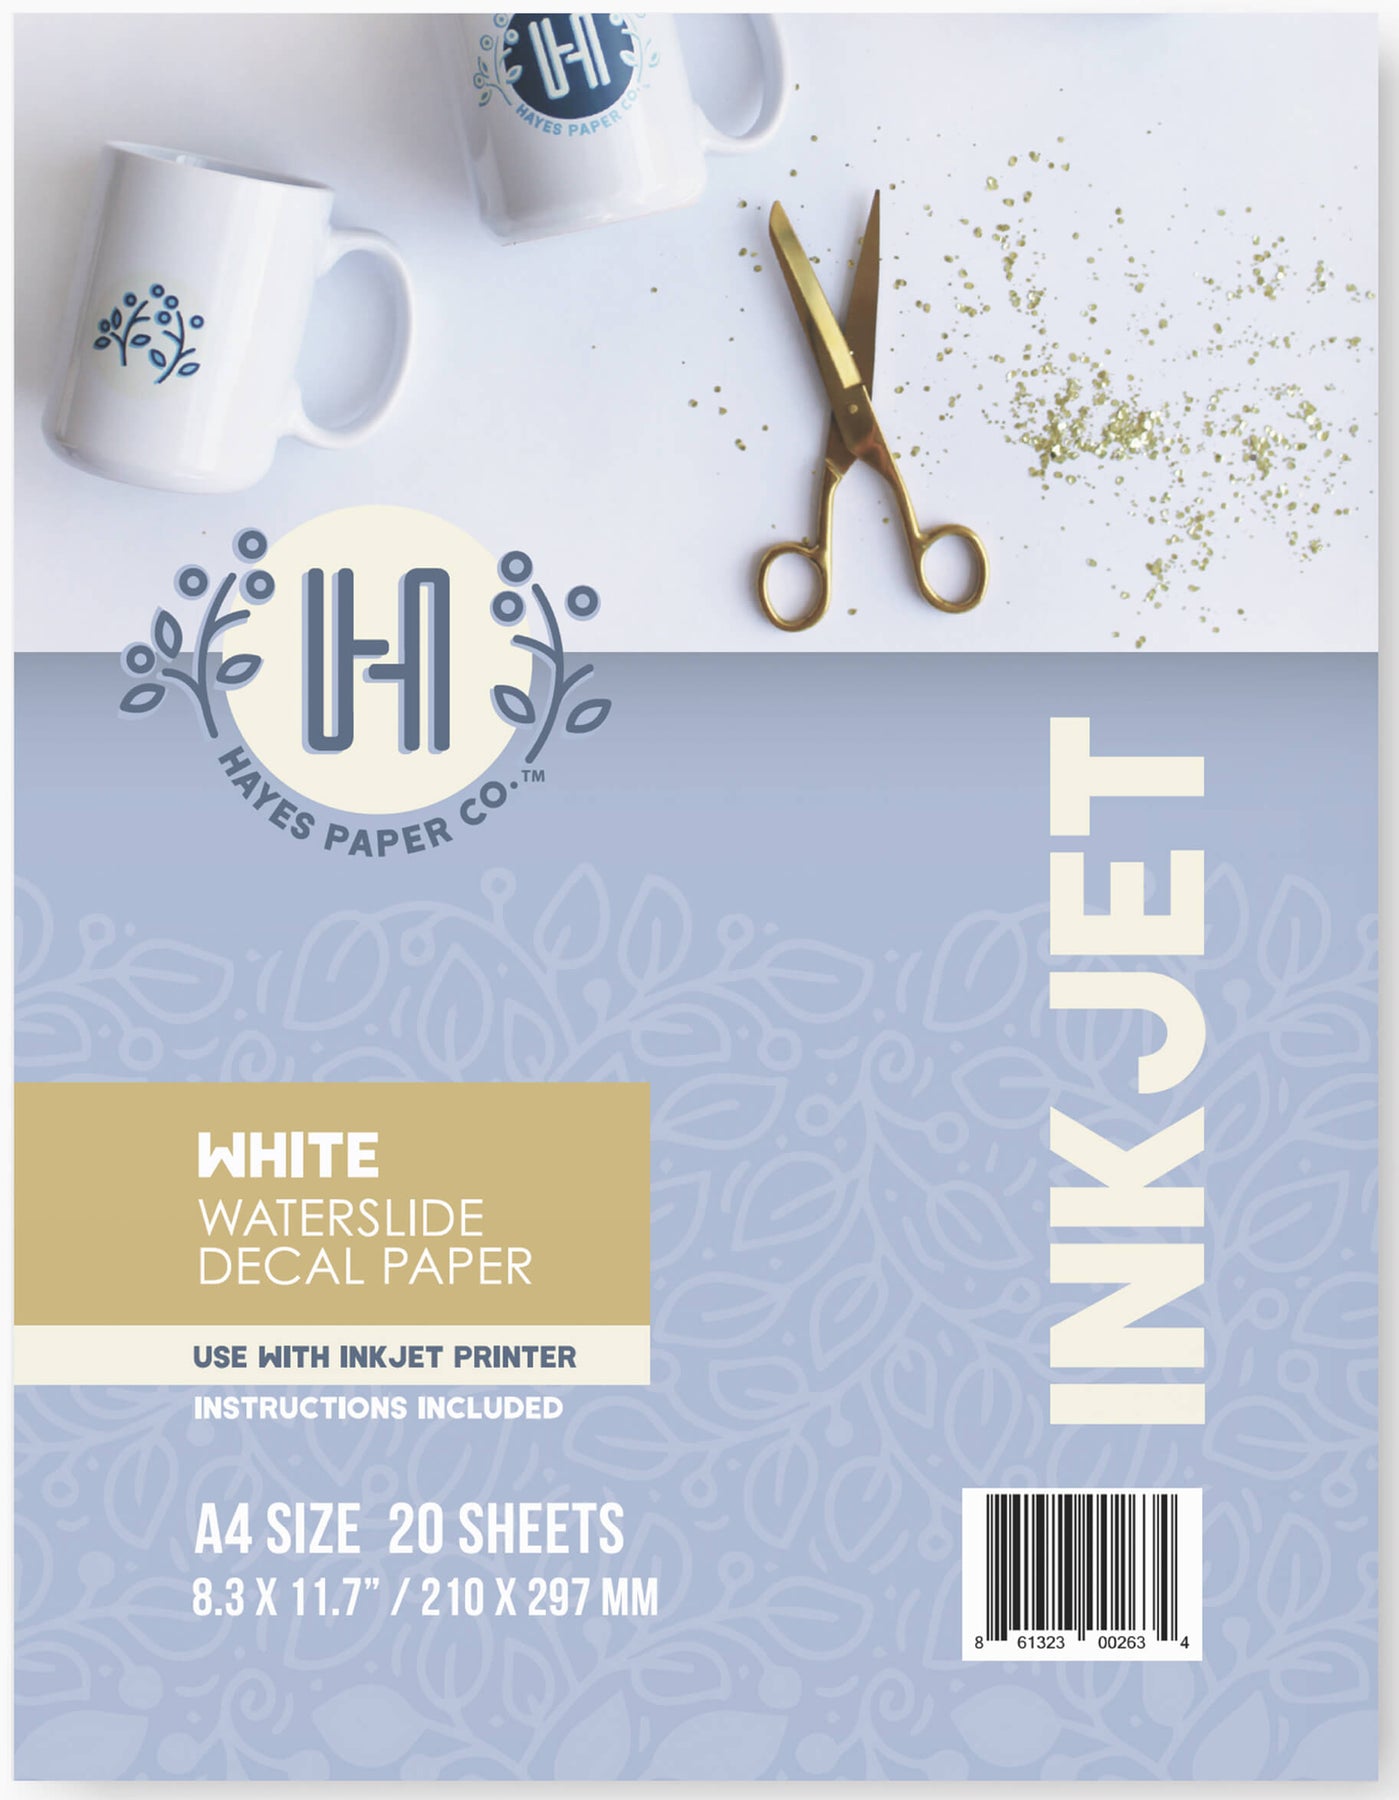 Printable Matte Vinyl Sticker Paper by Hayes Paper Co, A4 size, 15 Sheets, Size: A4 Paper 8.25 x 11.75, White